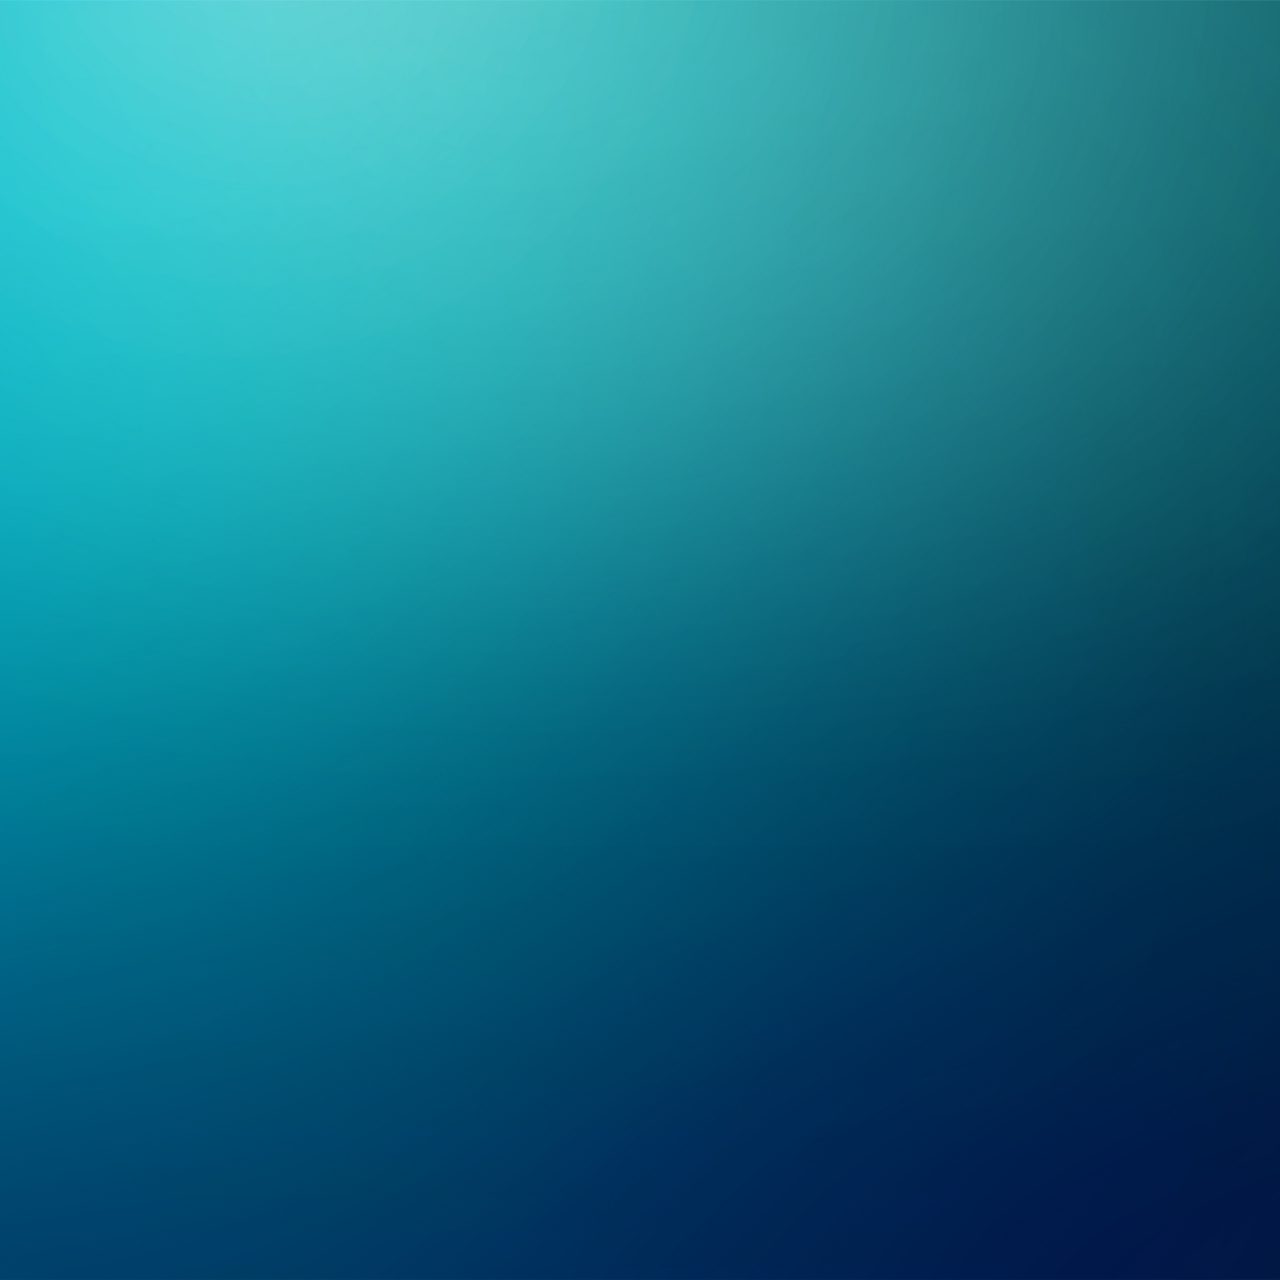 Teal to blue gradient